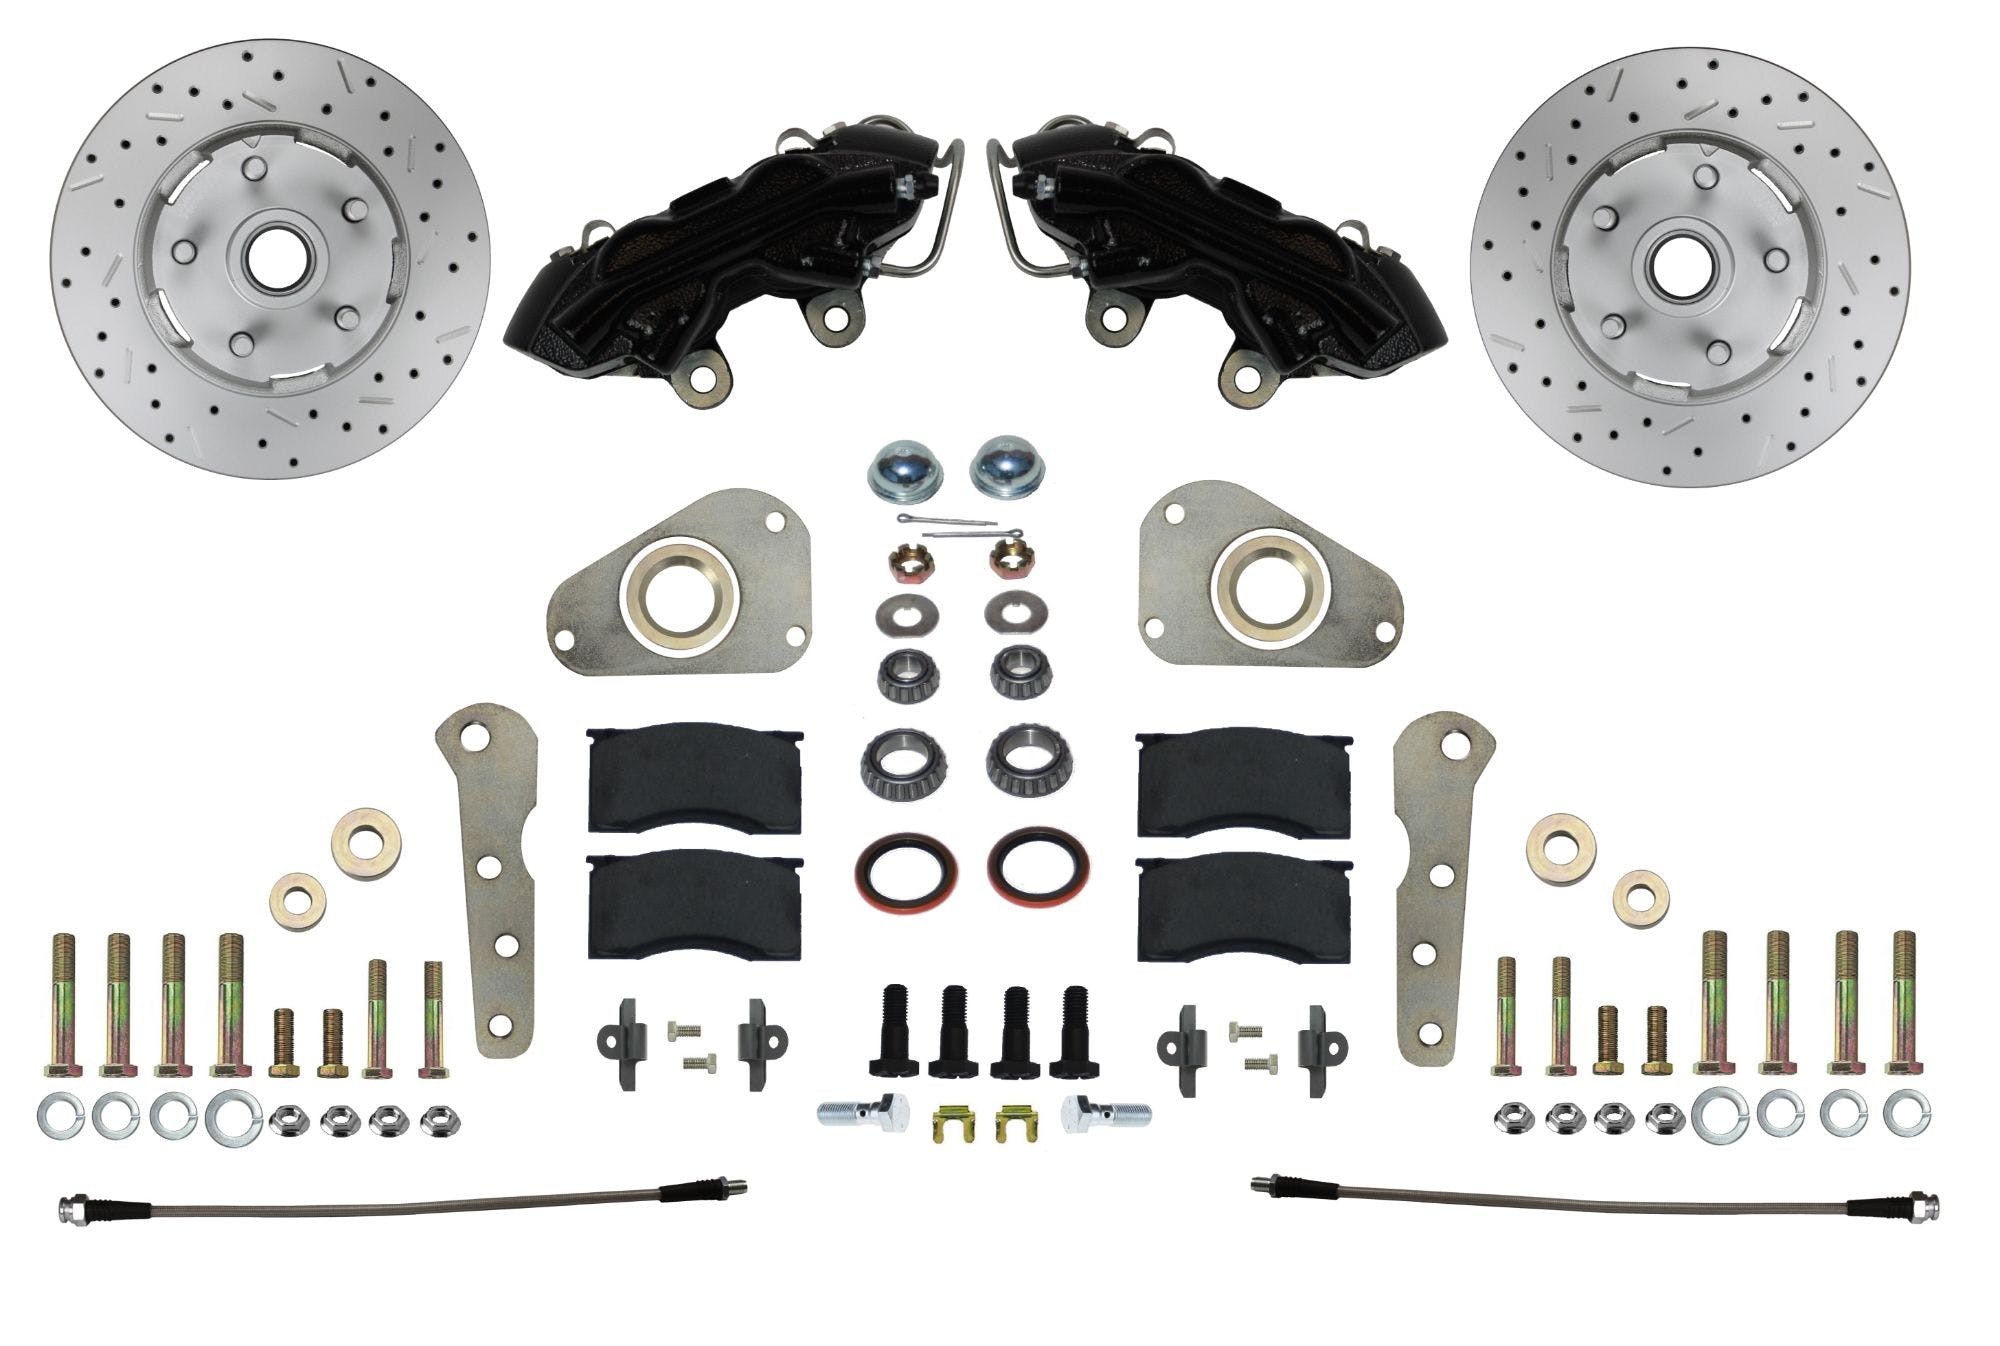 LEED Brakes BFC0025SMX Ford Full Size Manual Disc Conversion Kit, MaxGrip XDS, Spindle Mount-Blk Powder